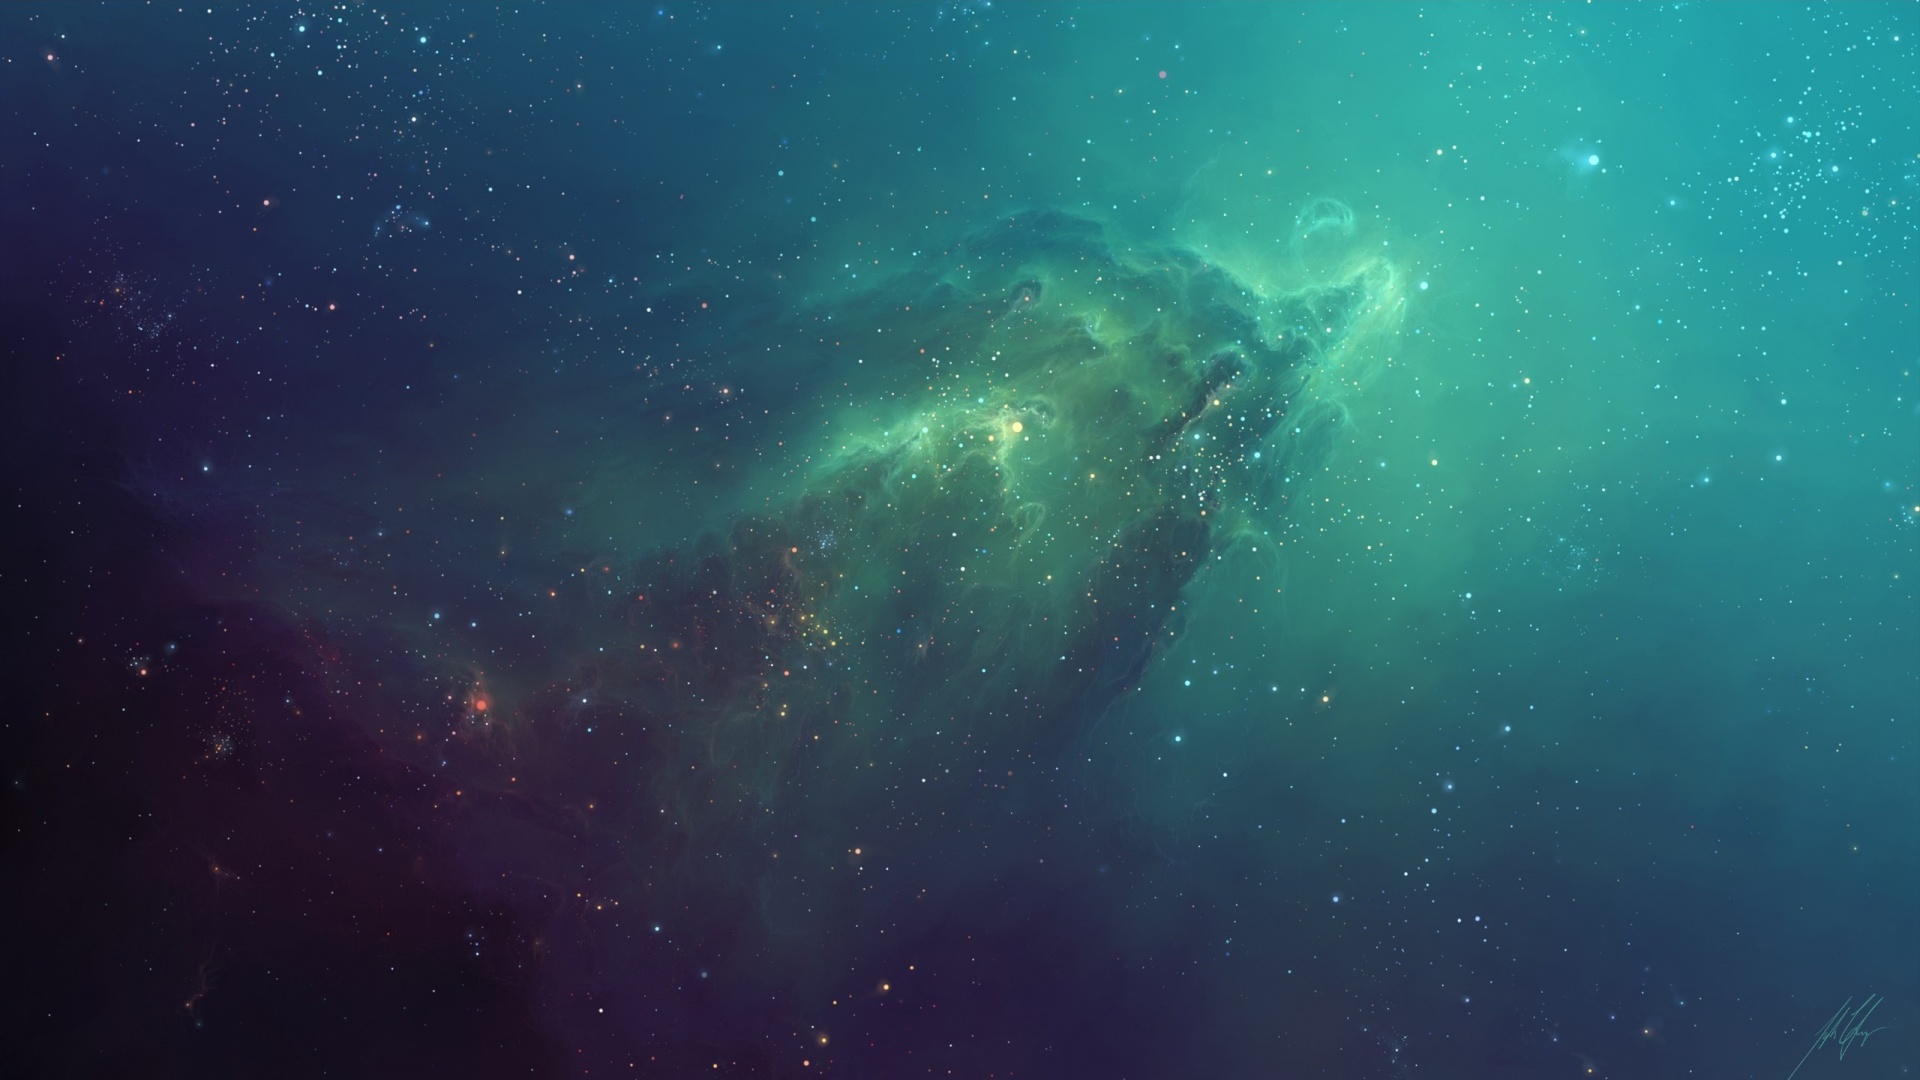 Uwy8J.jpg Space Wallpaper Mac Hd Background for And 1920x1080PX ~ Mac Space .